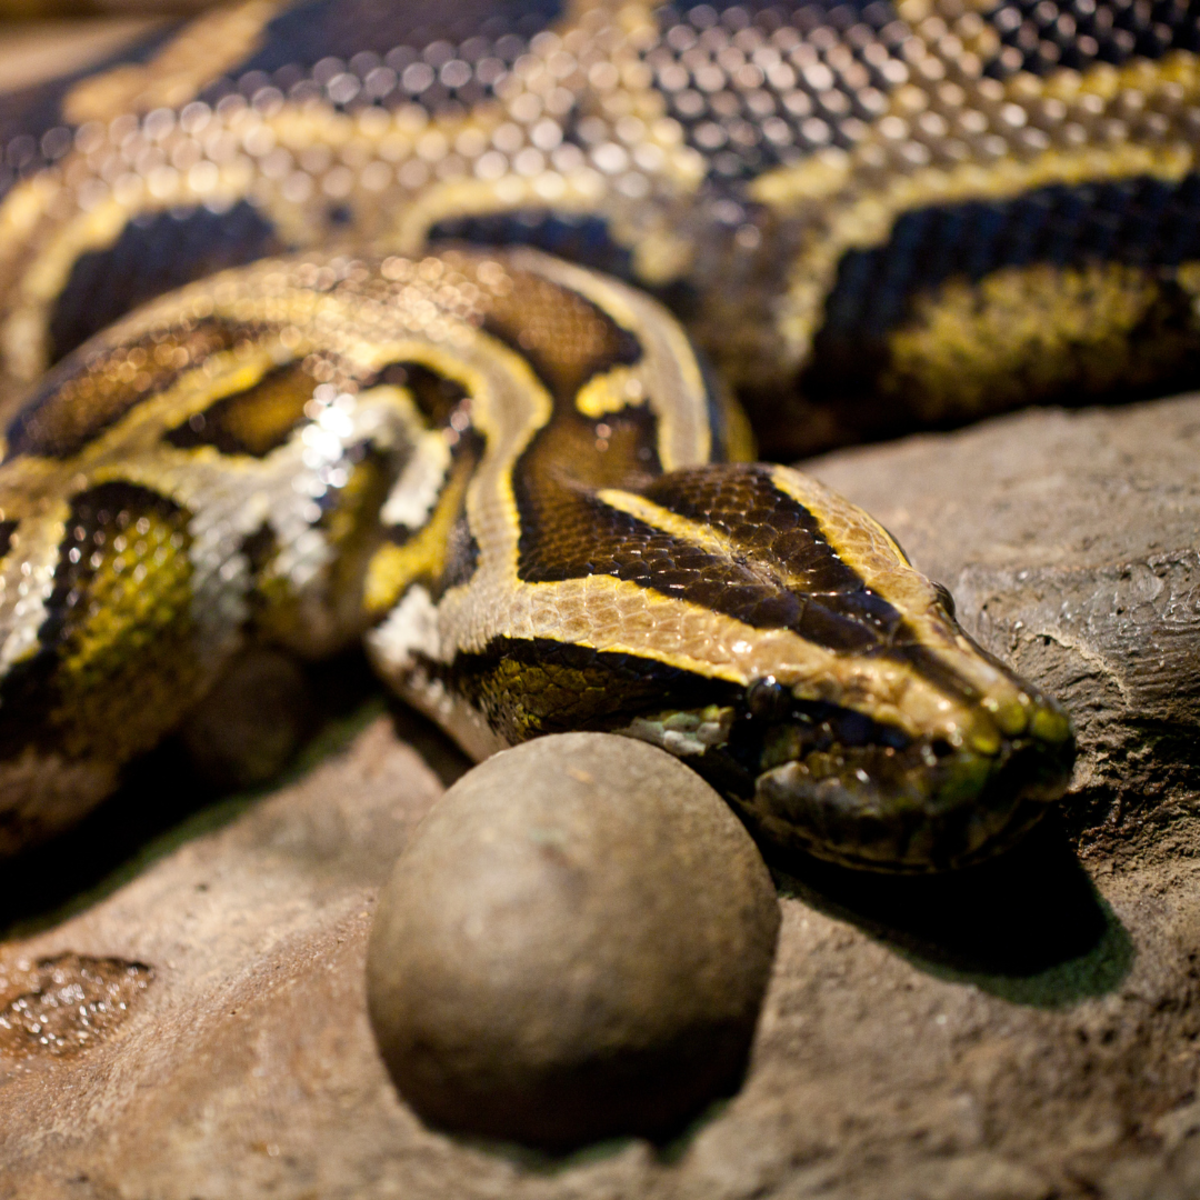 Anacondas: The Largest Snakes in the World